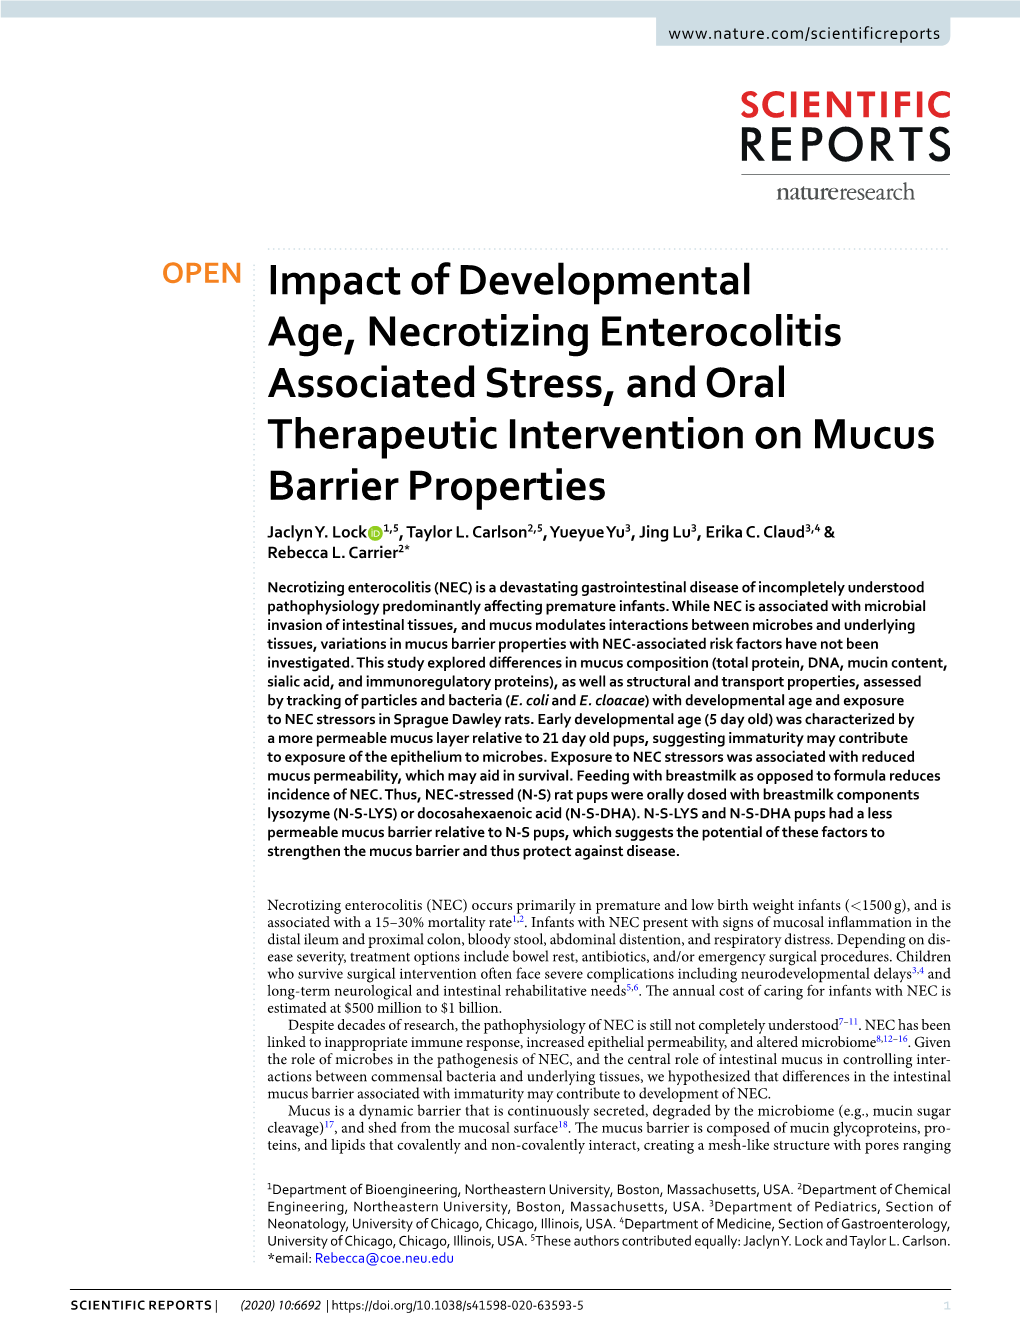 Impact of Developmental Age, Necrotizing Enterocolitis Associated Stress, and Oral Therapeutic Intervention on Mucus Barrier Properties Jaclyn Y